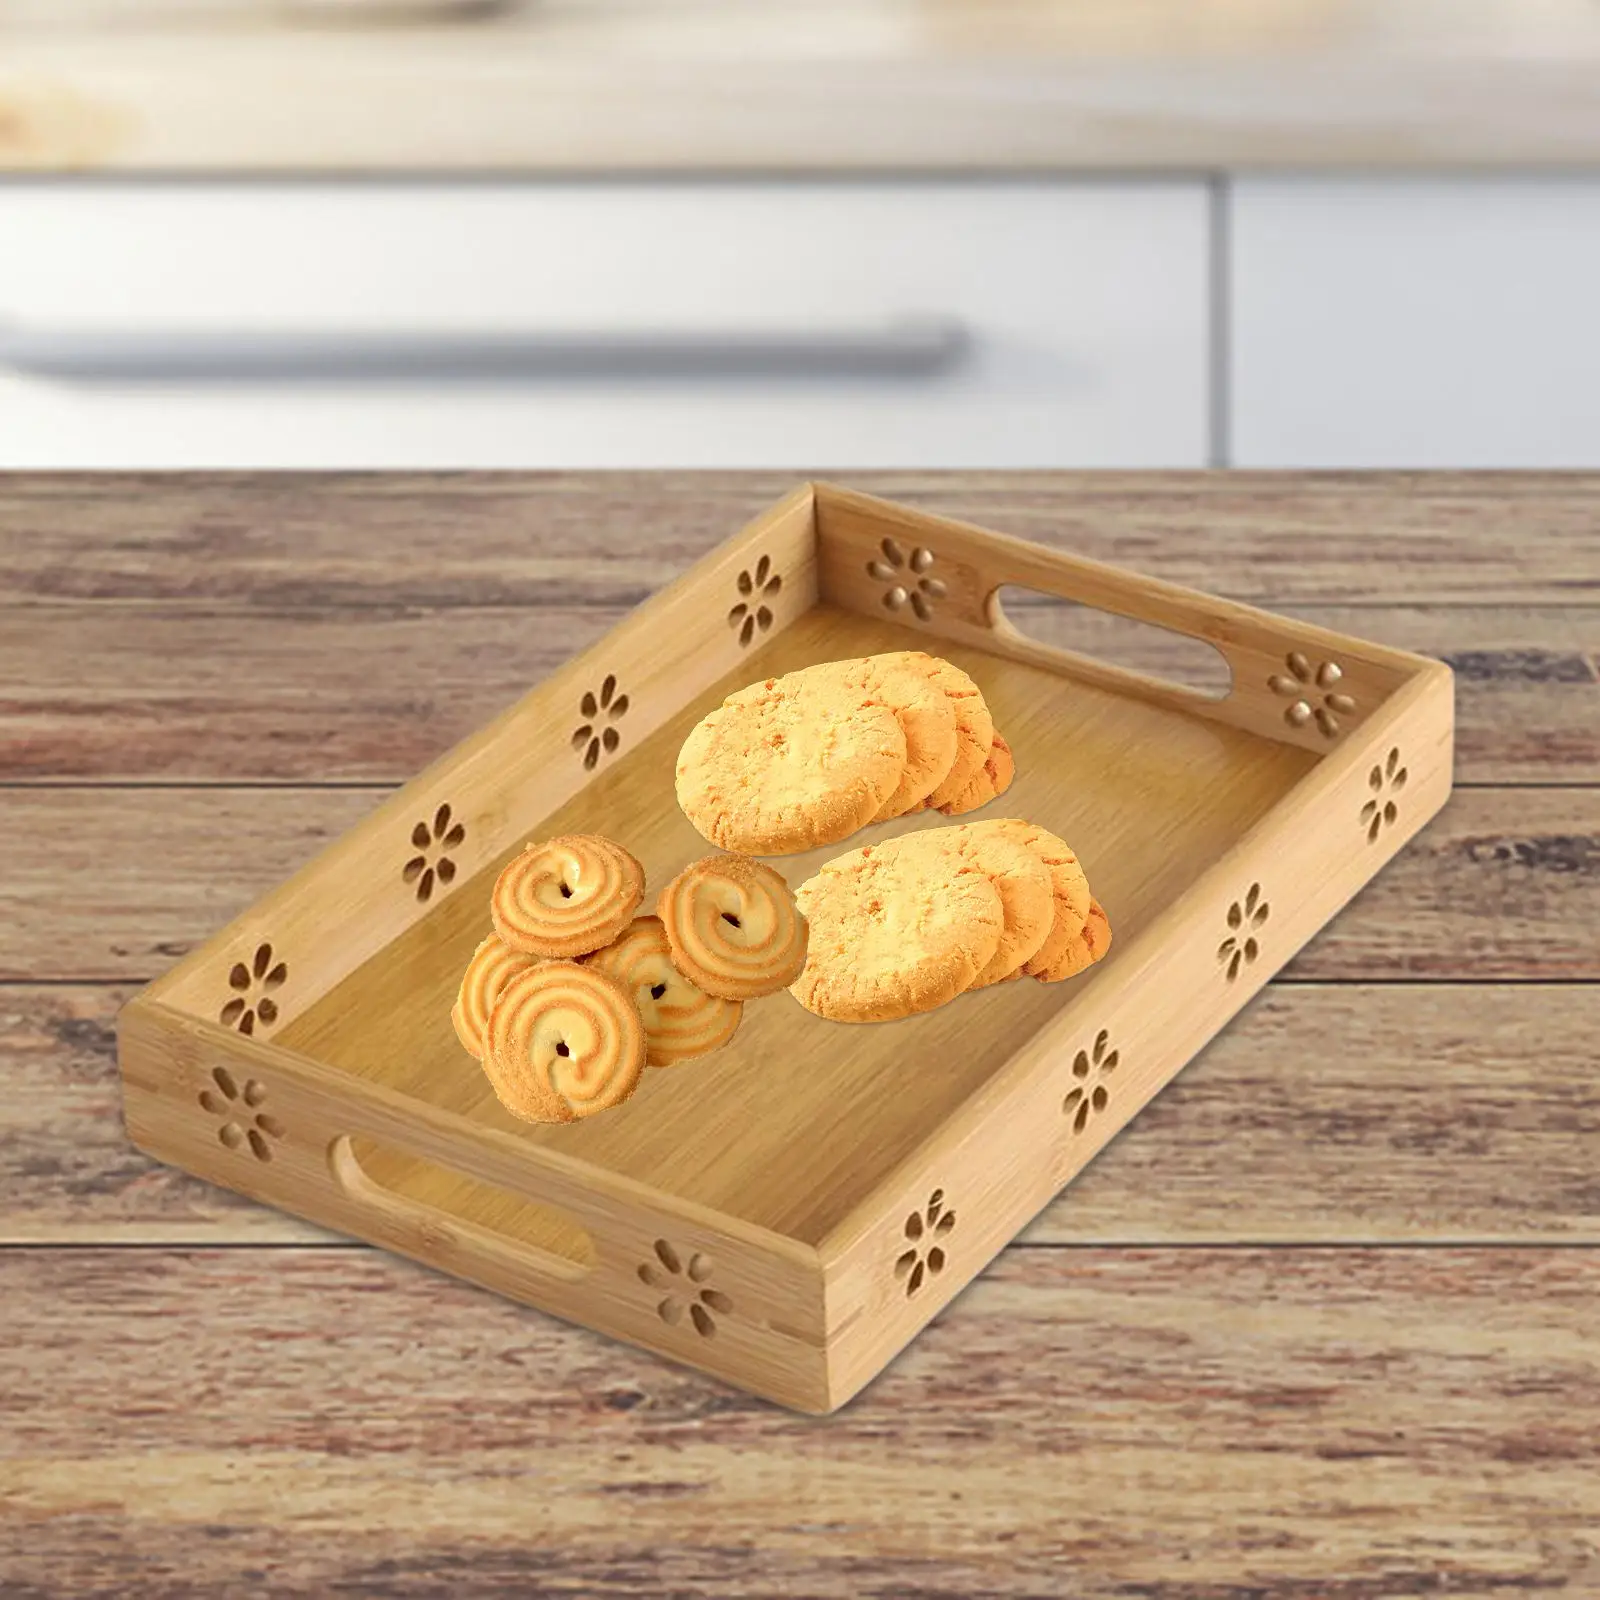 Bamboo Serving Tray Rectangular Tray for Kitchen Breakfast Hotel Home Decor Table